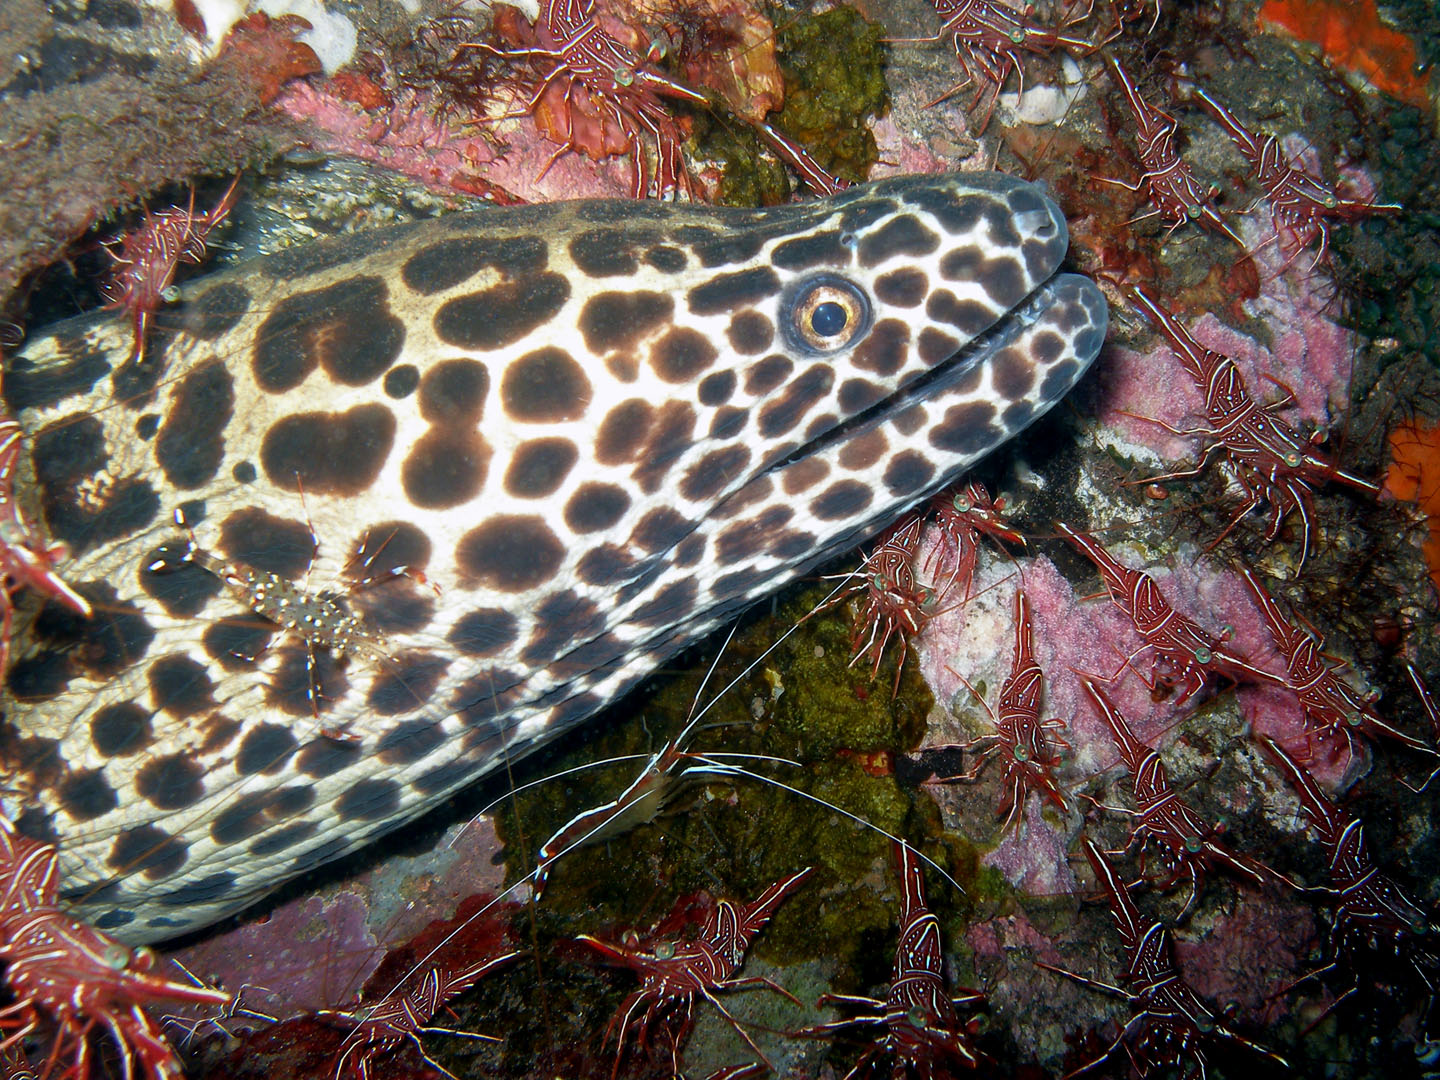 Black bloched  moray and coral shrimps